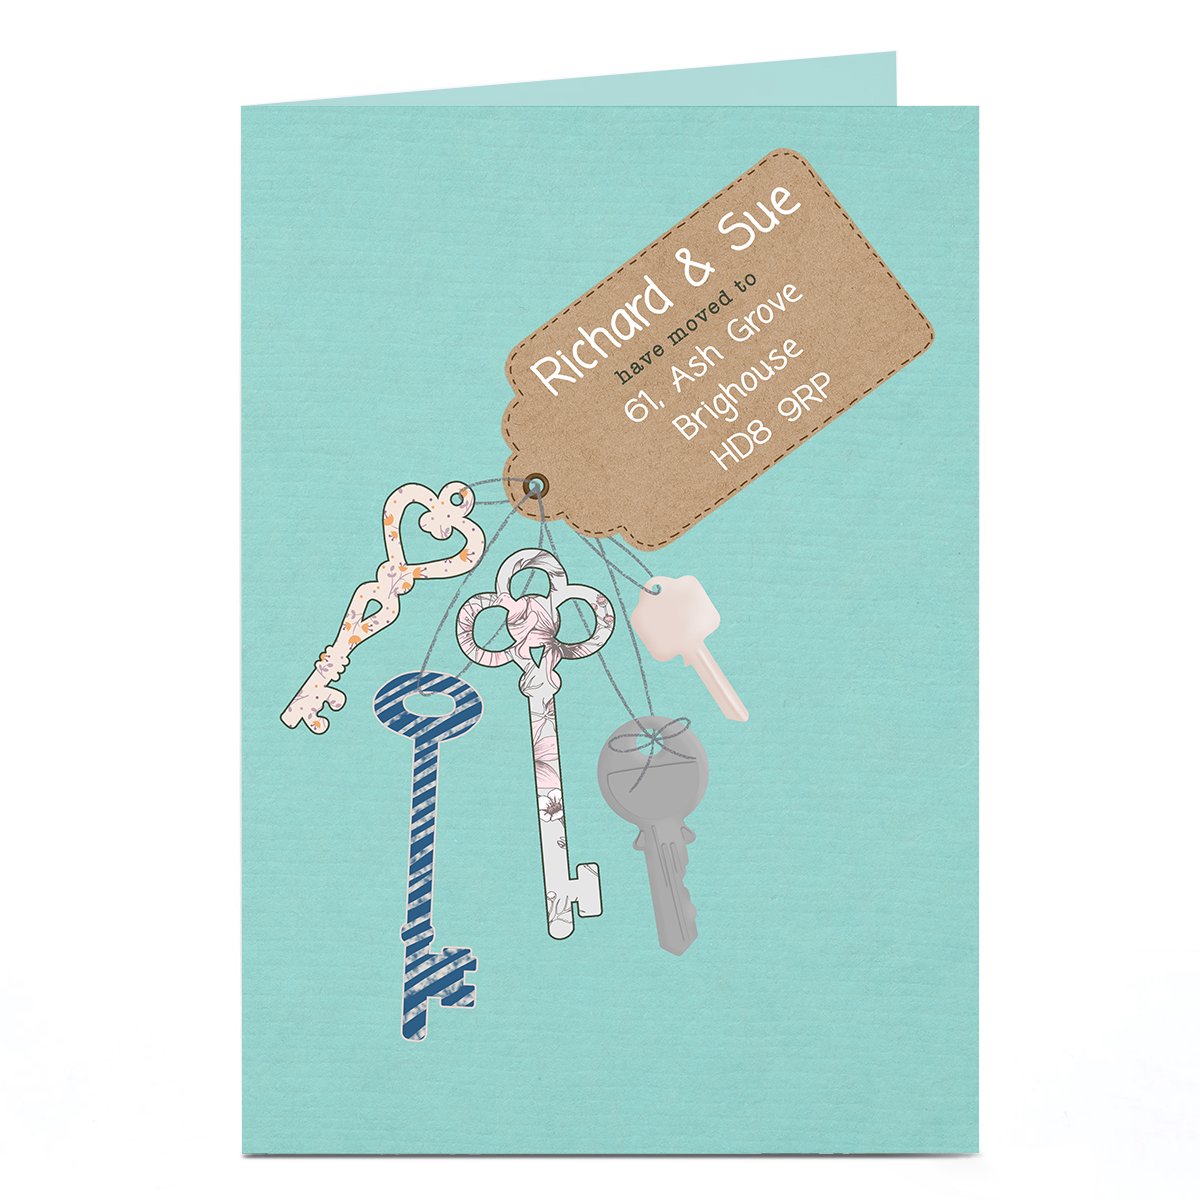 Personalised New Home Card - WeÃ¢â‚¬â„¢ve Moved